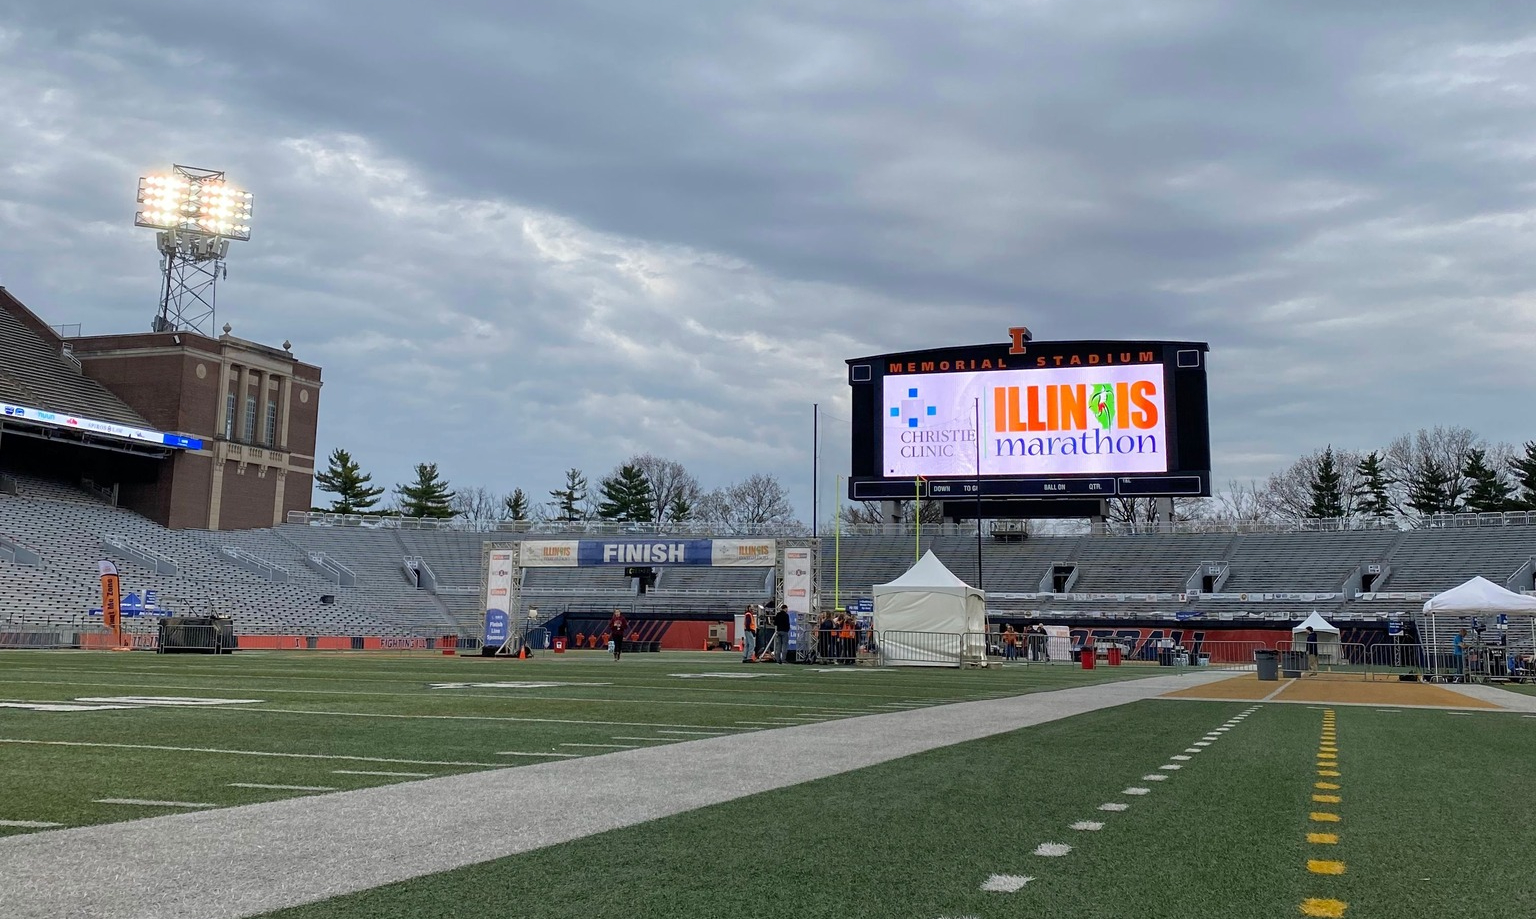 The finish line of the Christie Clinic Illinois Marathon in Memorial Stadium at the University of Illinois. The finish line is in the distance with a big blue with white text banner that reads FINISH. There is a large jumbotron screen behind that says Christie Clinic and Illinois Marathon. There stadium is empty.